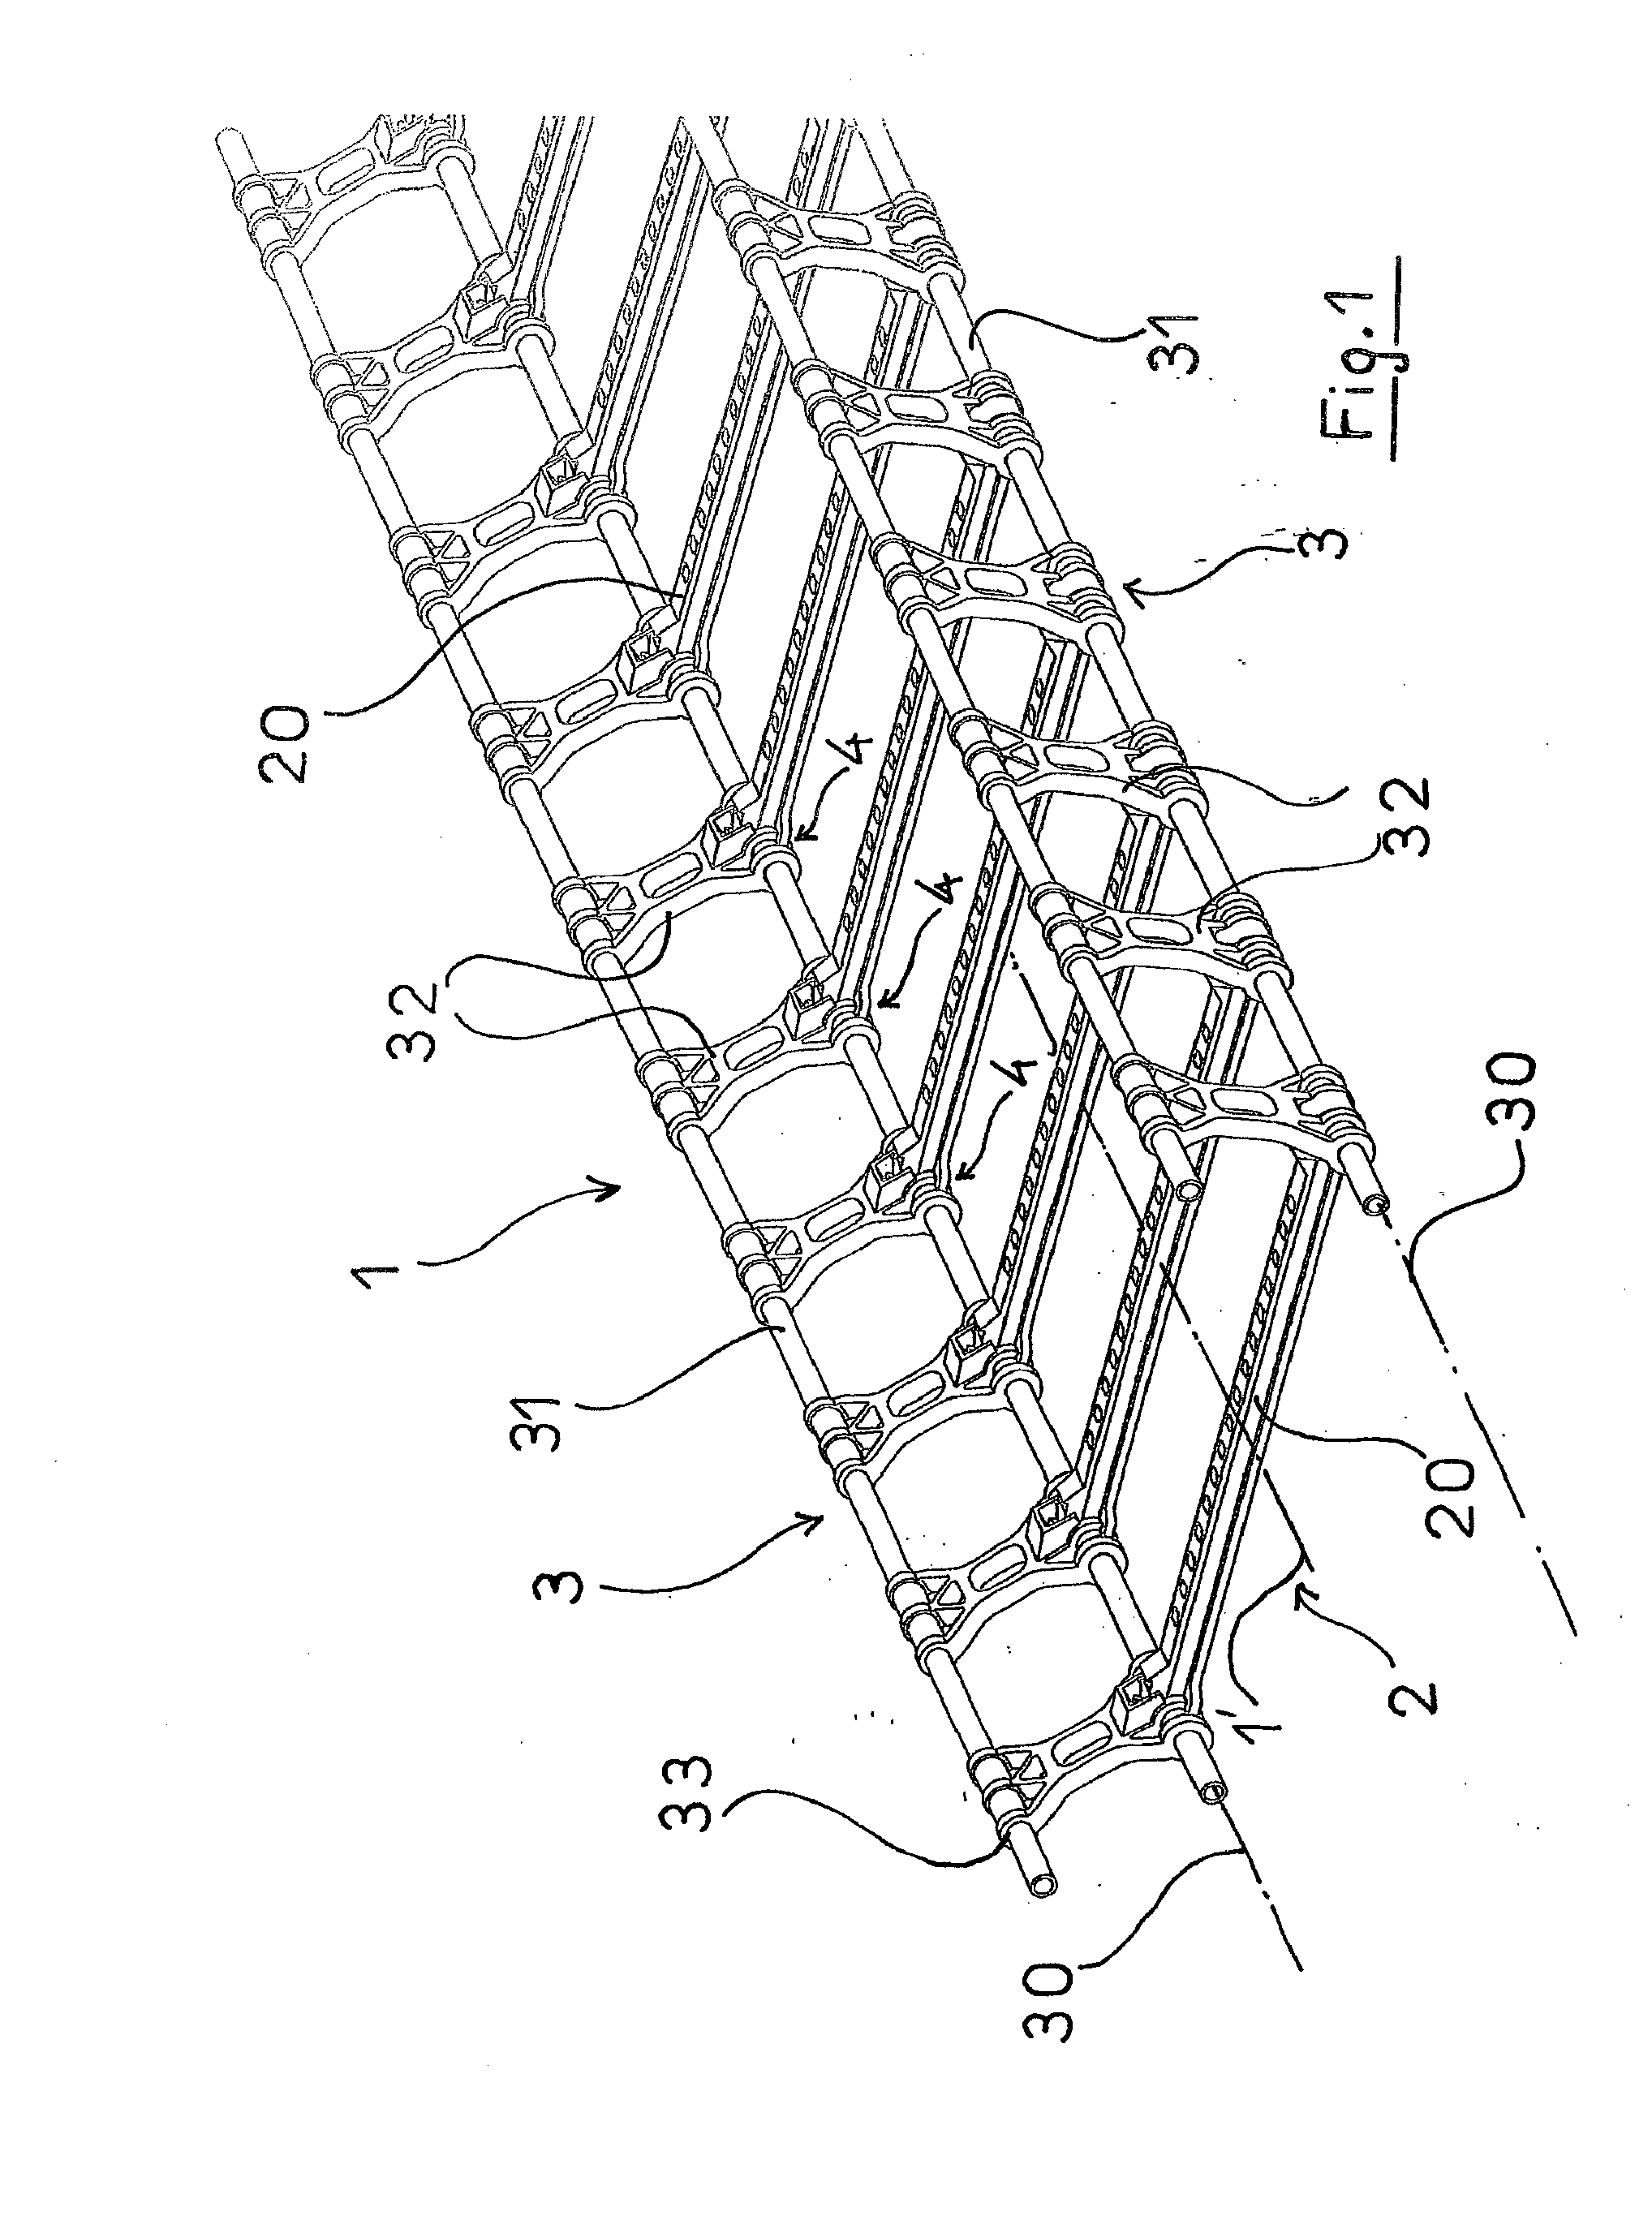 Cable routing device